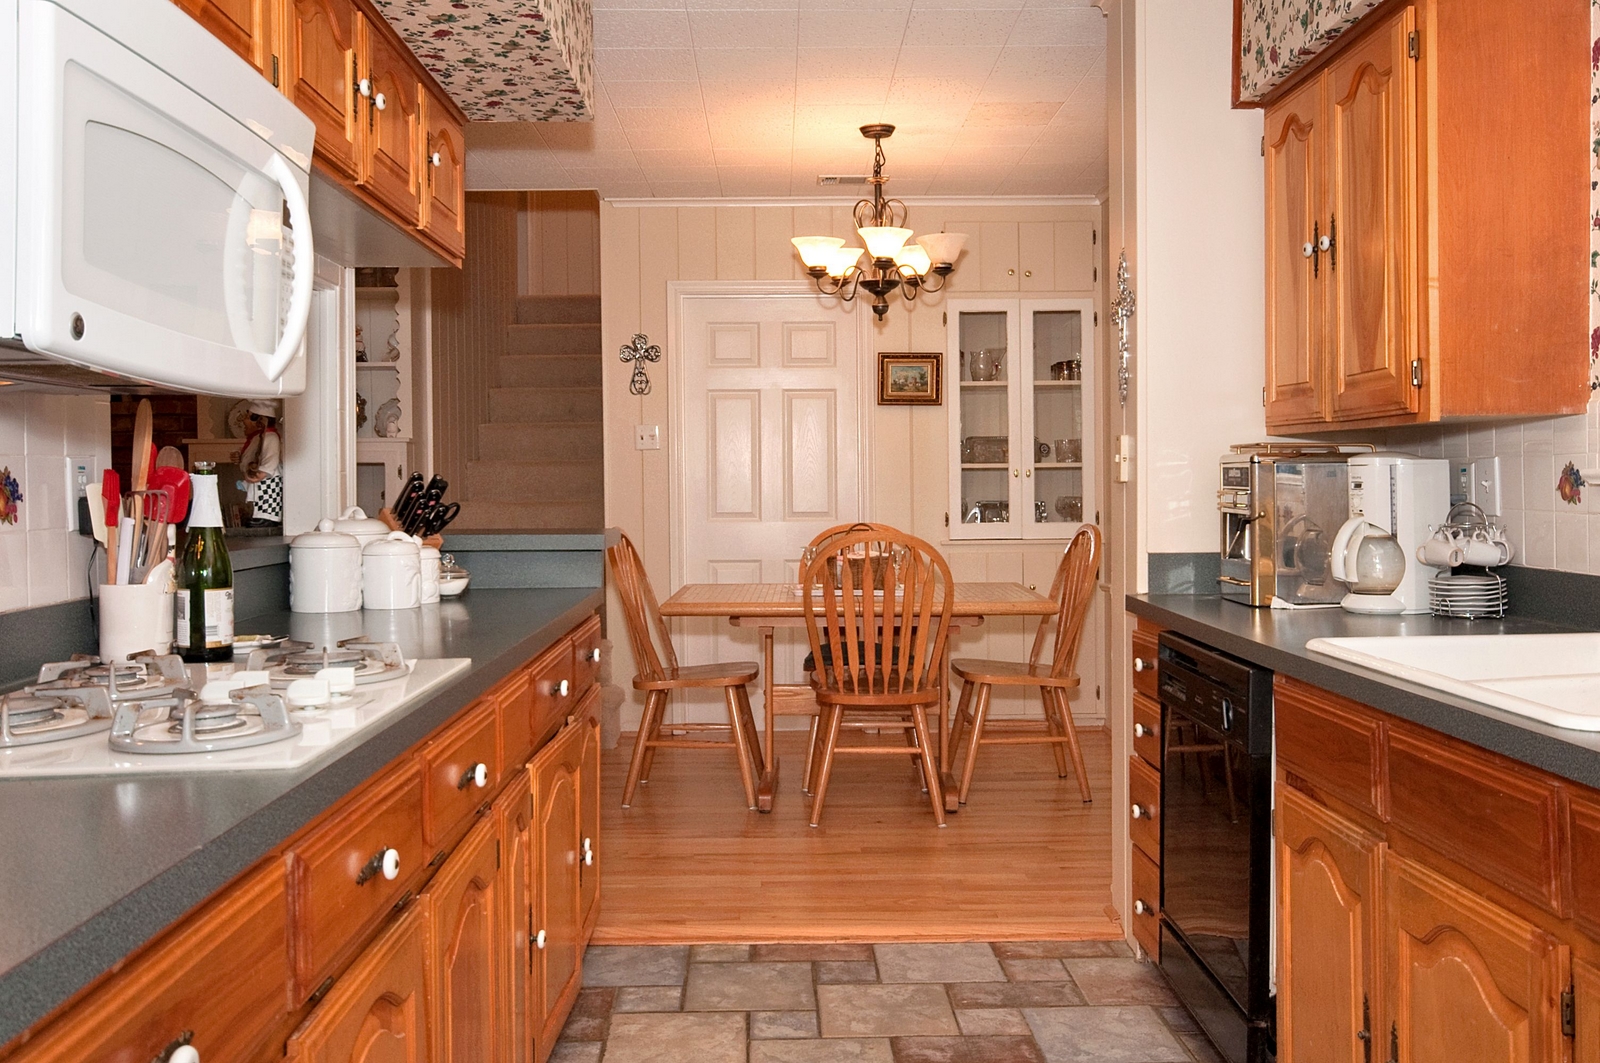 Kitchen from Dining Room.jpg